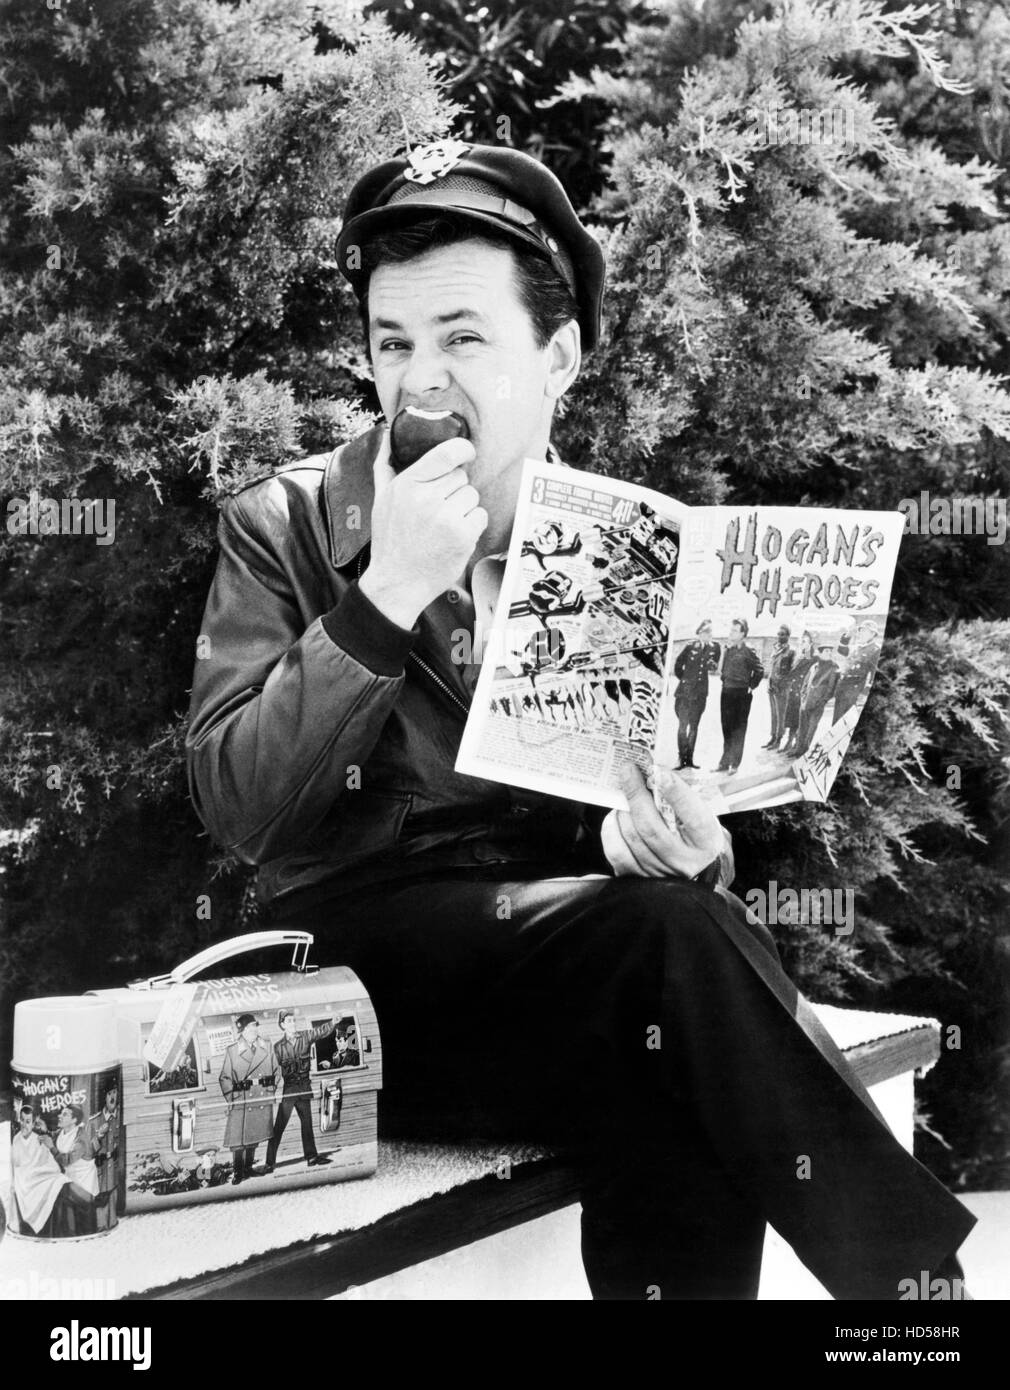 HOGAN'S HEROES, Bob Crane with thermos, lunchbox and comic book all product spinoffs from the show, 1965-1971 Stock Photo